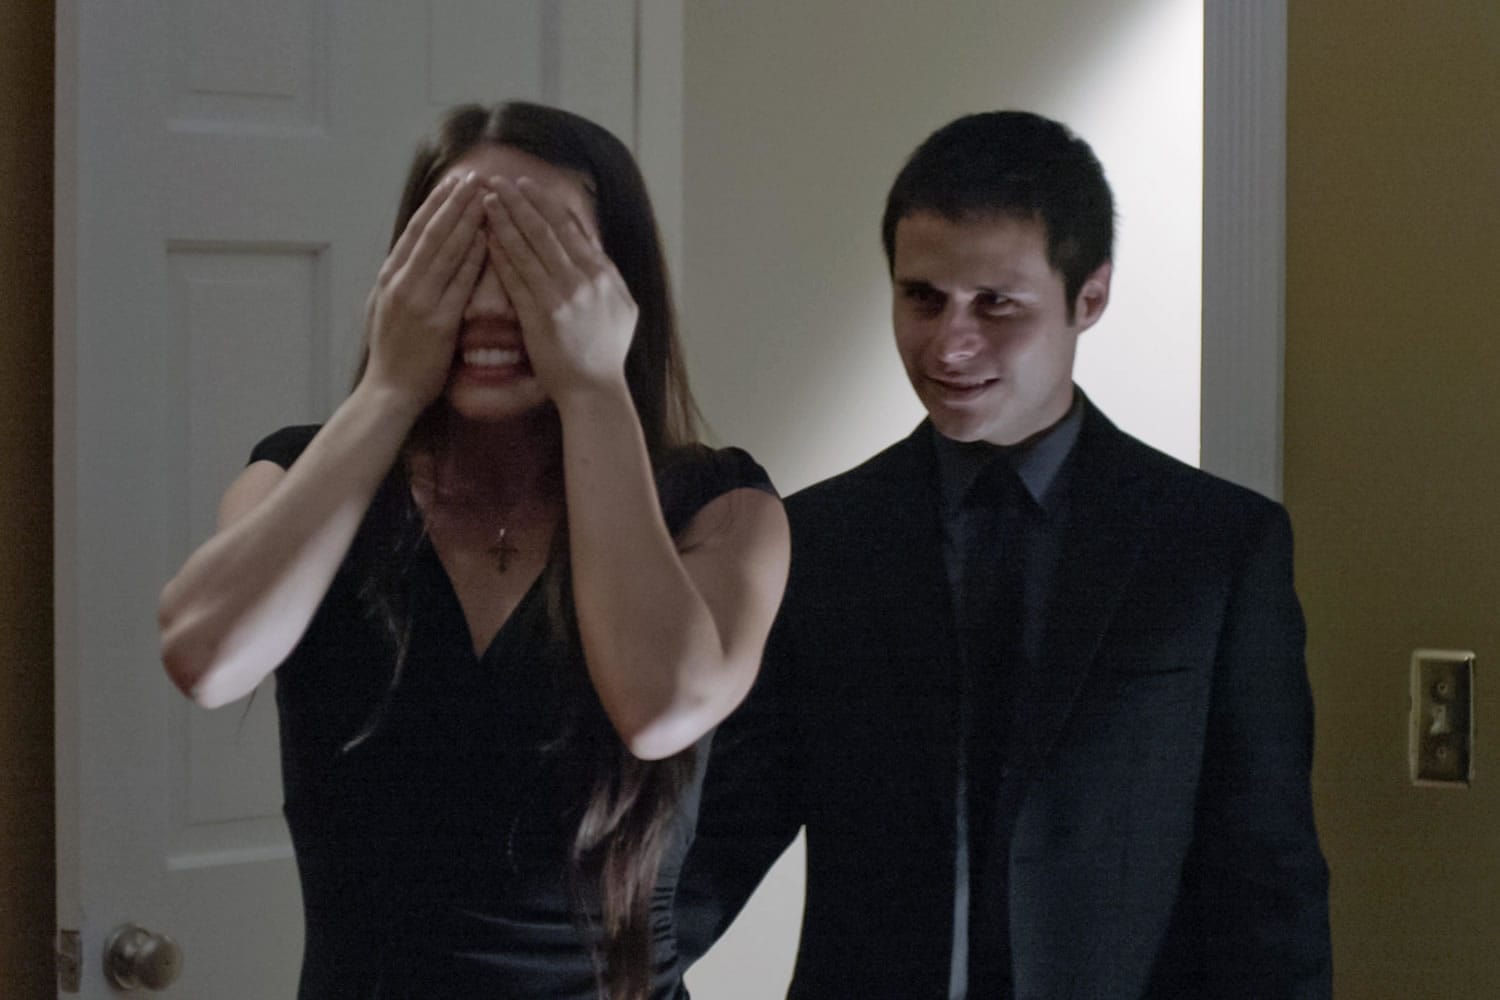 Matt takes Linda to her surprise while she covers her eyes in &quot;Your Worst Nightmare&quot; on Investigation Discovery.